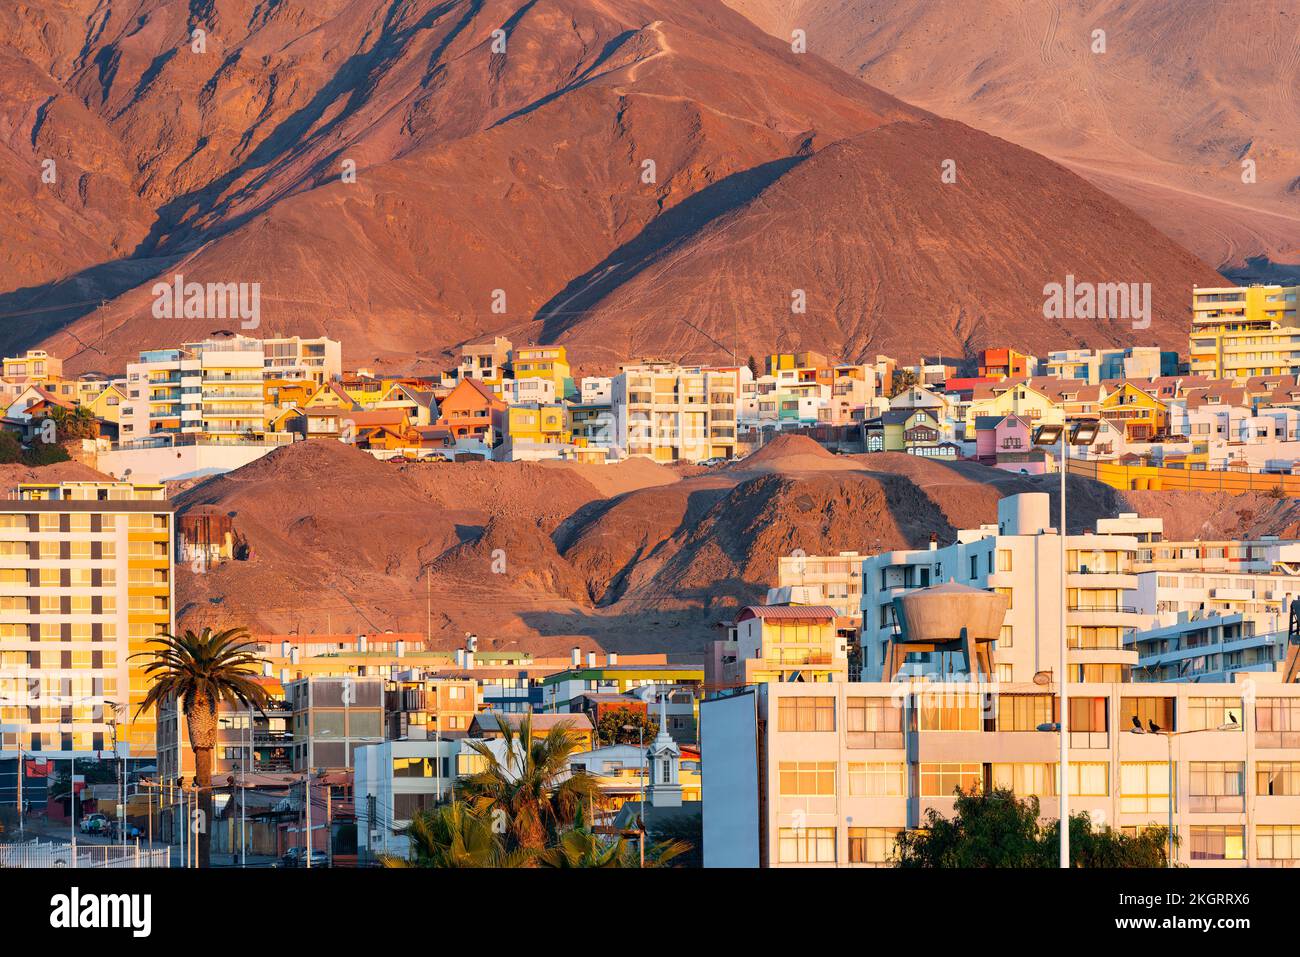 Colorful houses in the dry hills at the coast of the Atacama desert in the city of Antofagasta, Chile Stock Photo